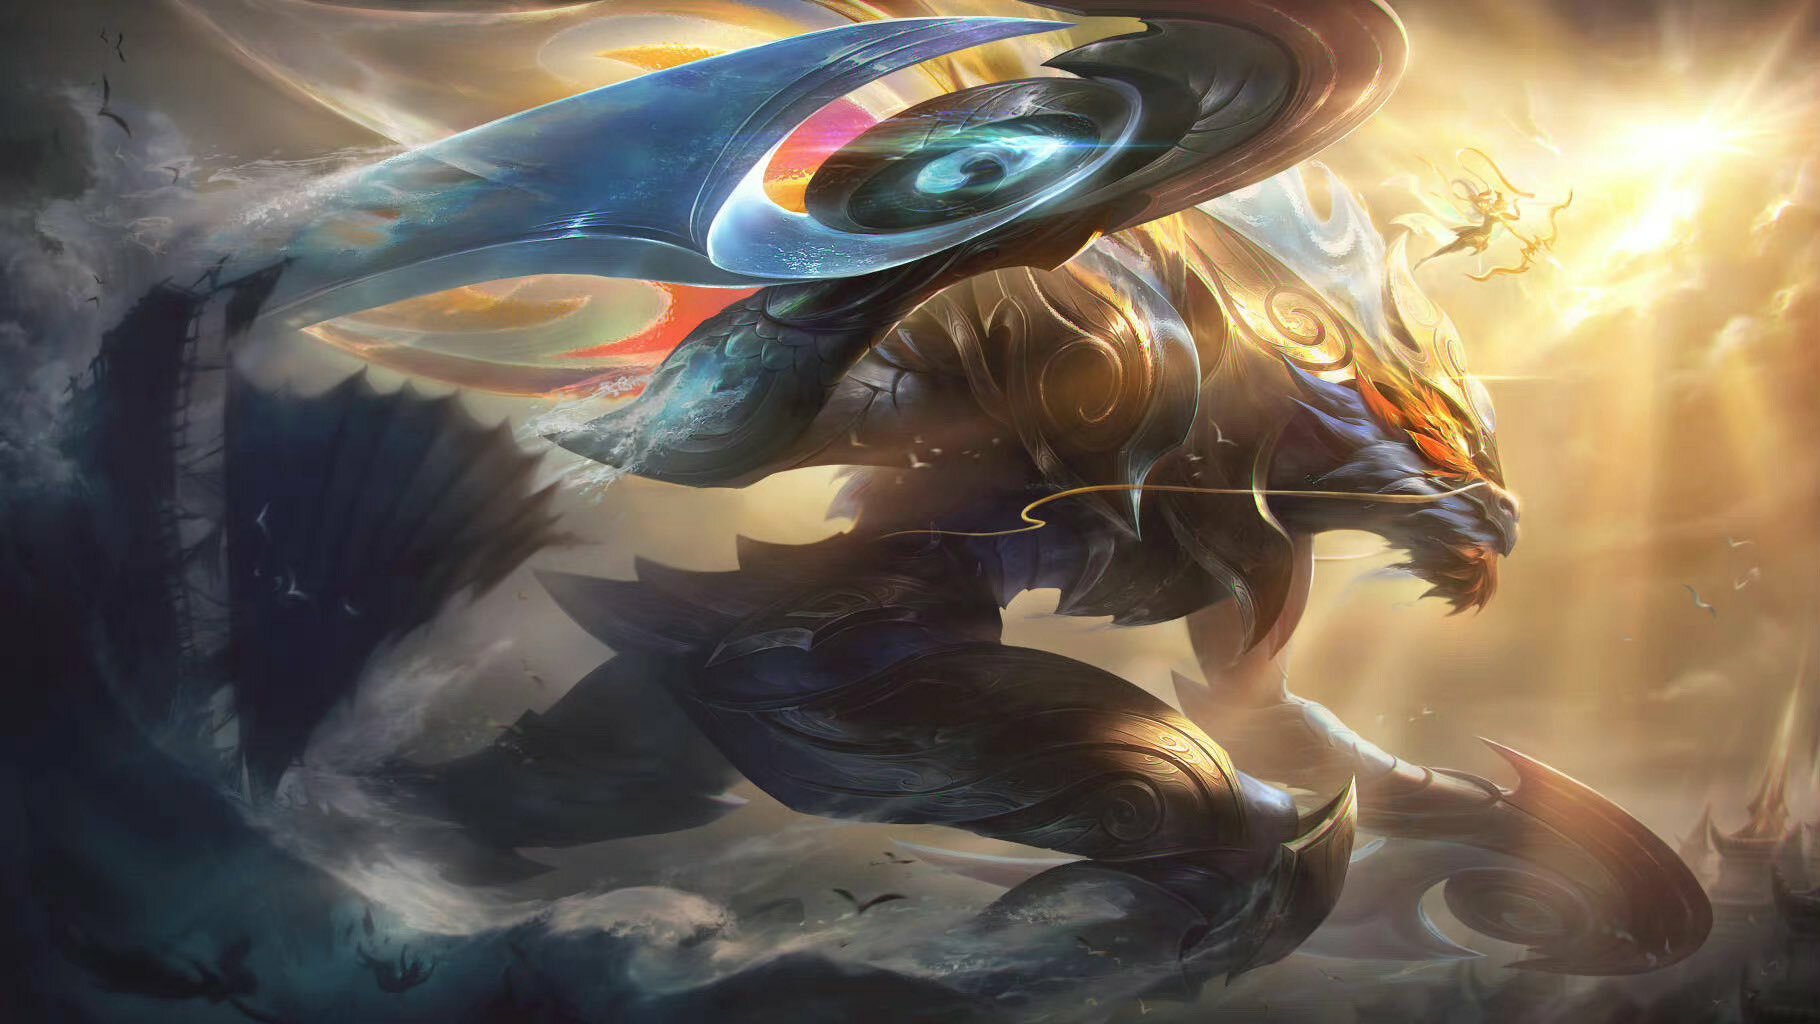 League of Legends Winterblessed Skins 2023 leaks: Champions, expected  release date, and more